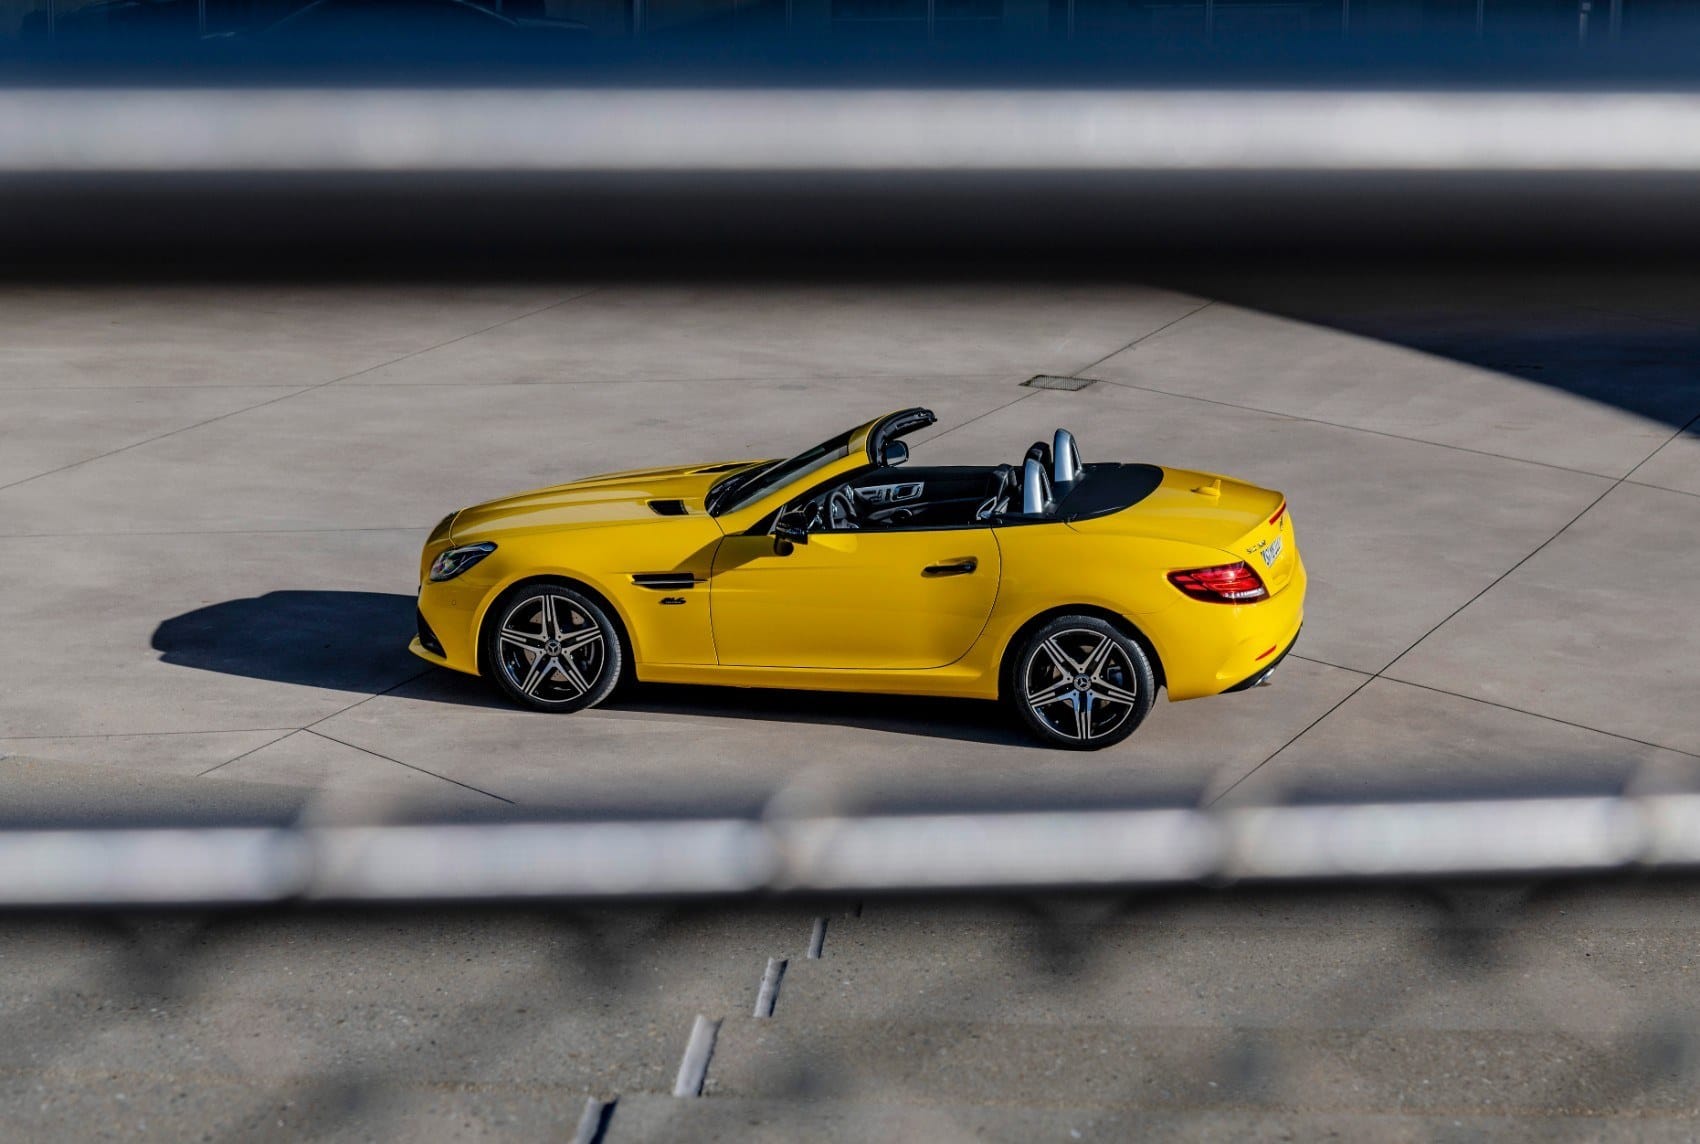 2020 Mercedes-Benz SLC: All Good Things Come To An End